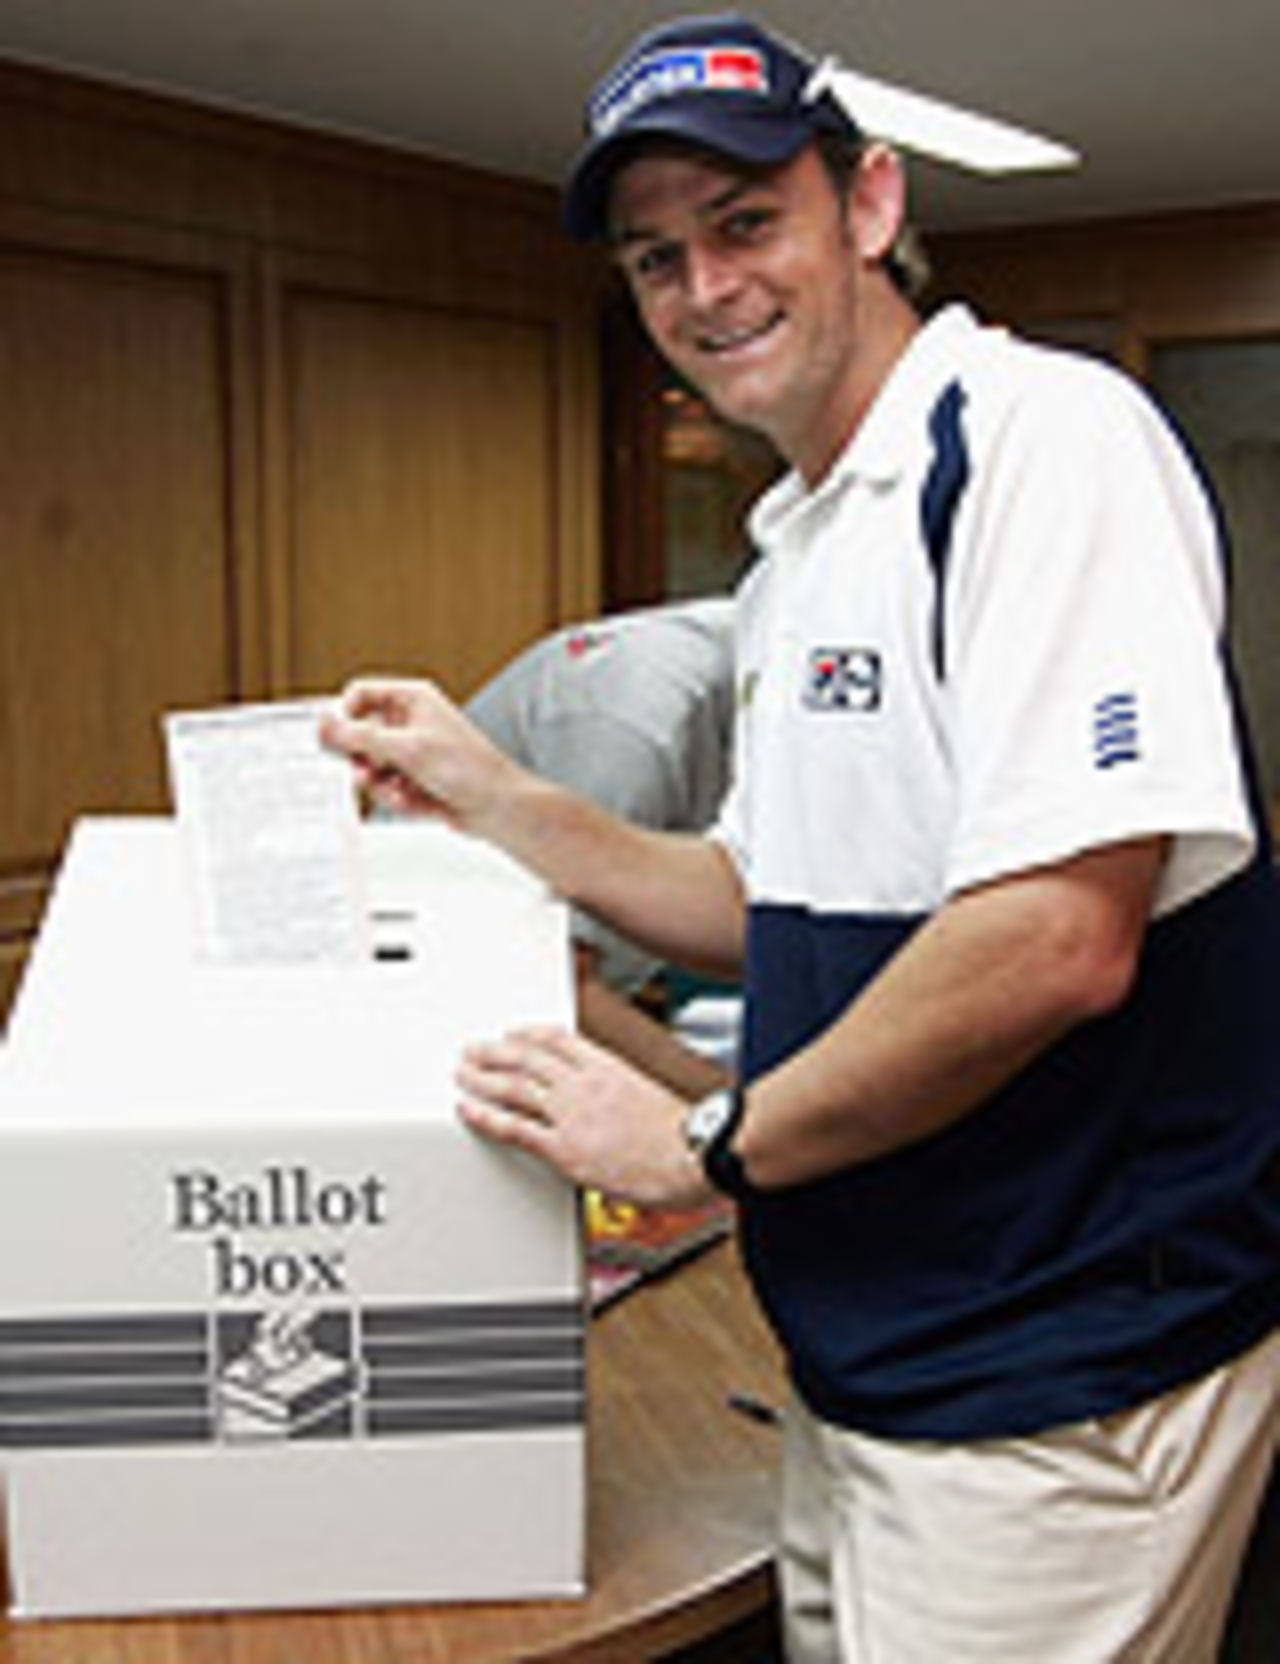 Adam Gilchrist takes time out from practice to vote in Australia's federal elections